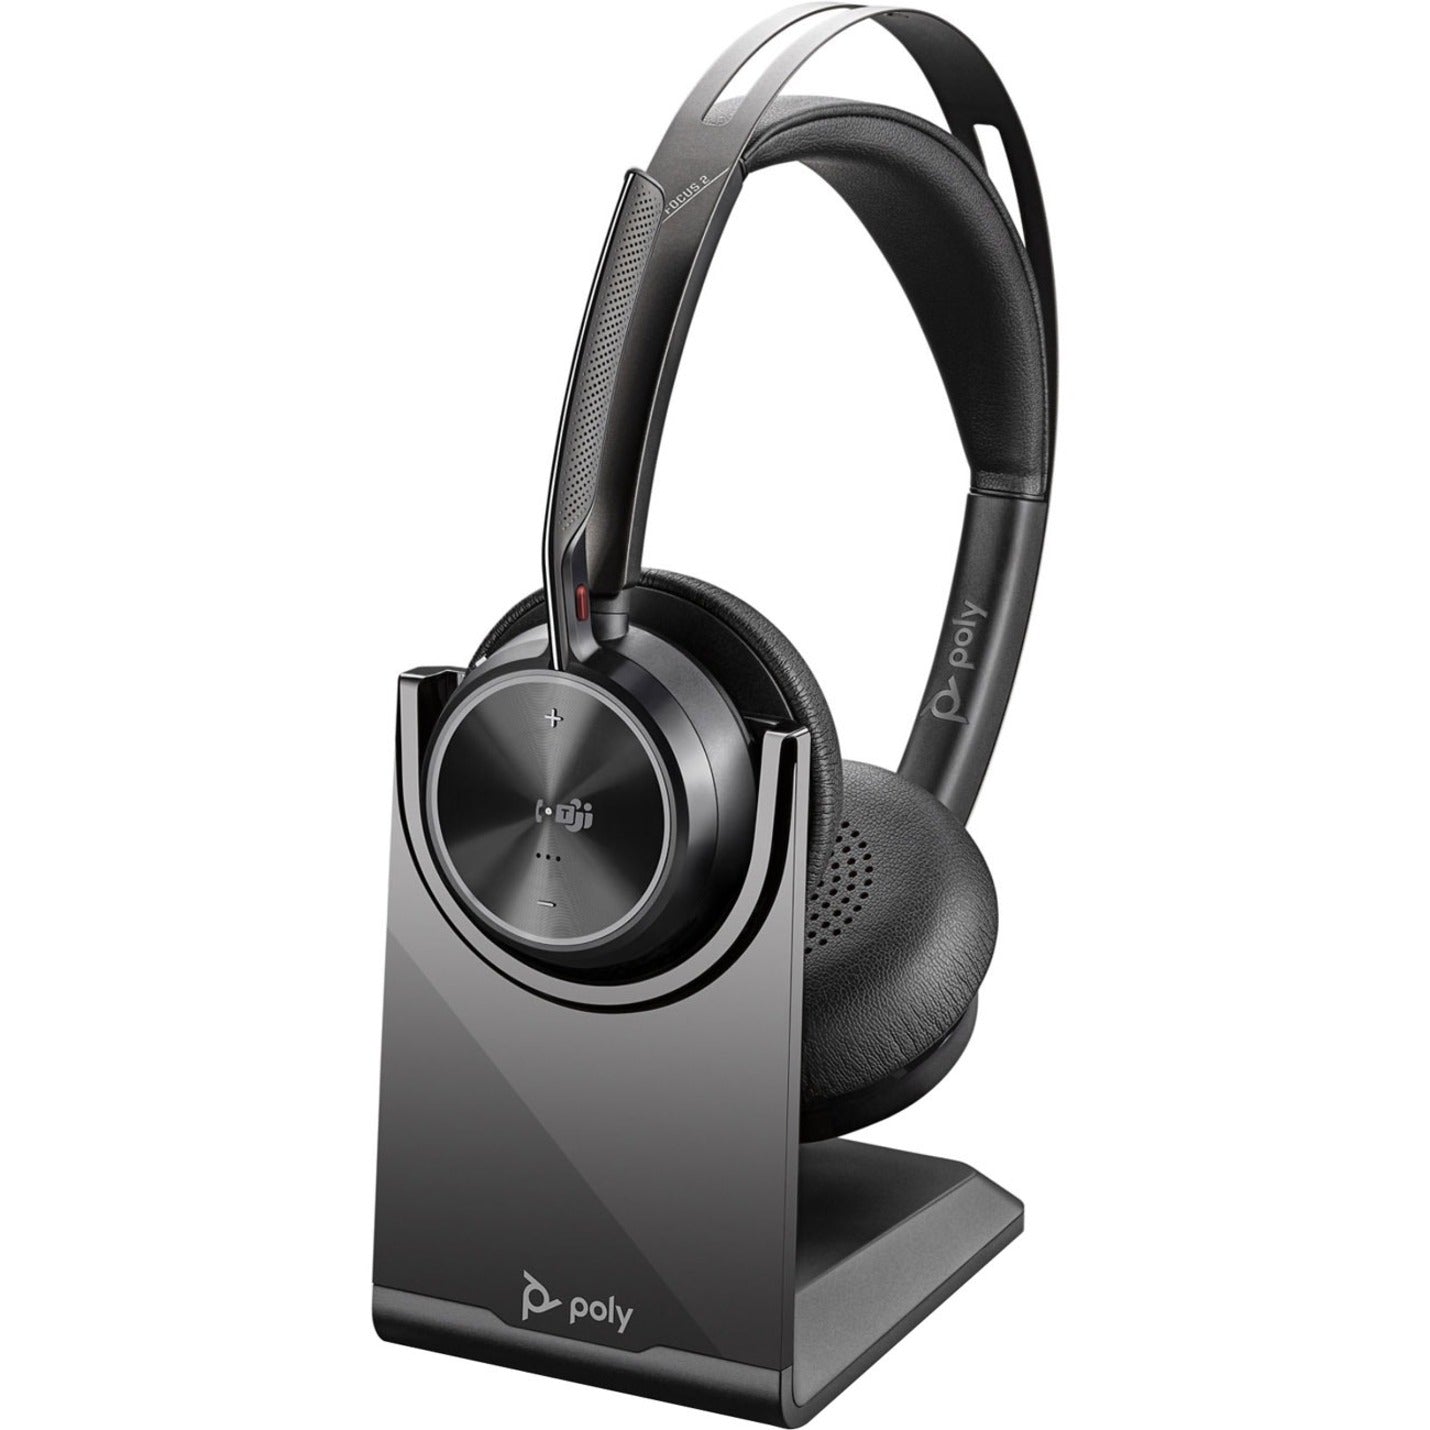 Poly 213727-02 Voyager Focus 2 Headset, Wireless Bluetooth Stereo Headphones with Noise Cancelling, 2 Year Warranty